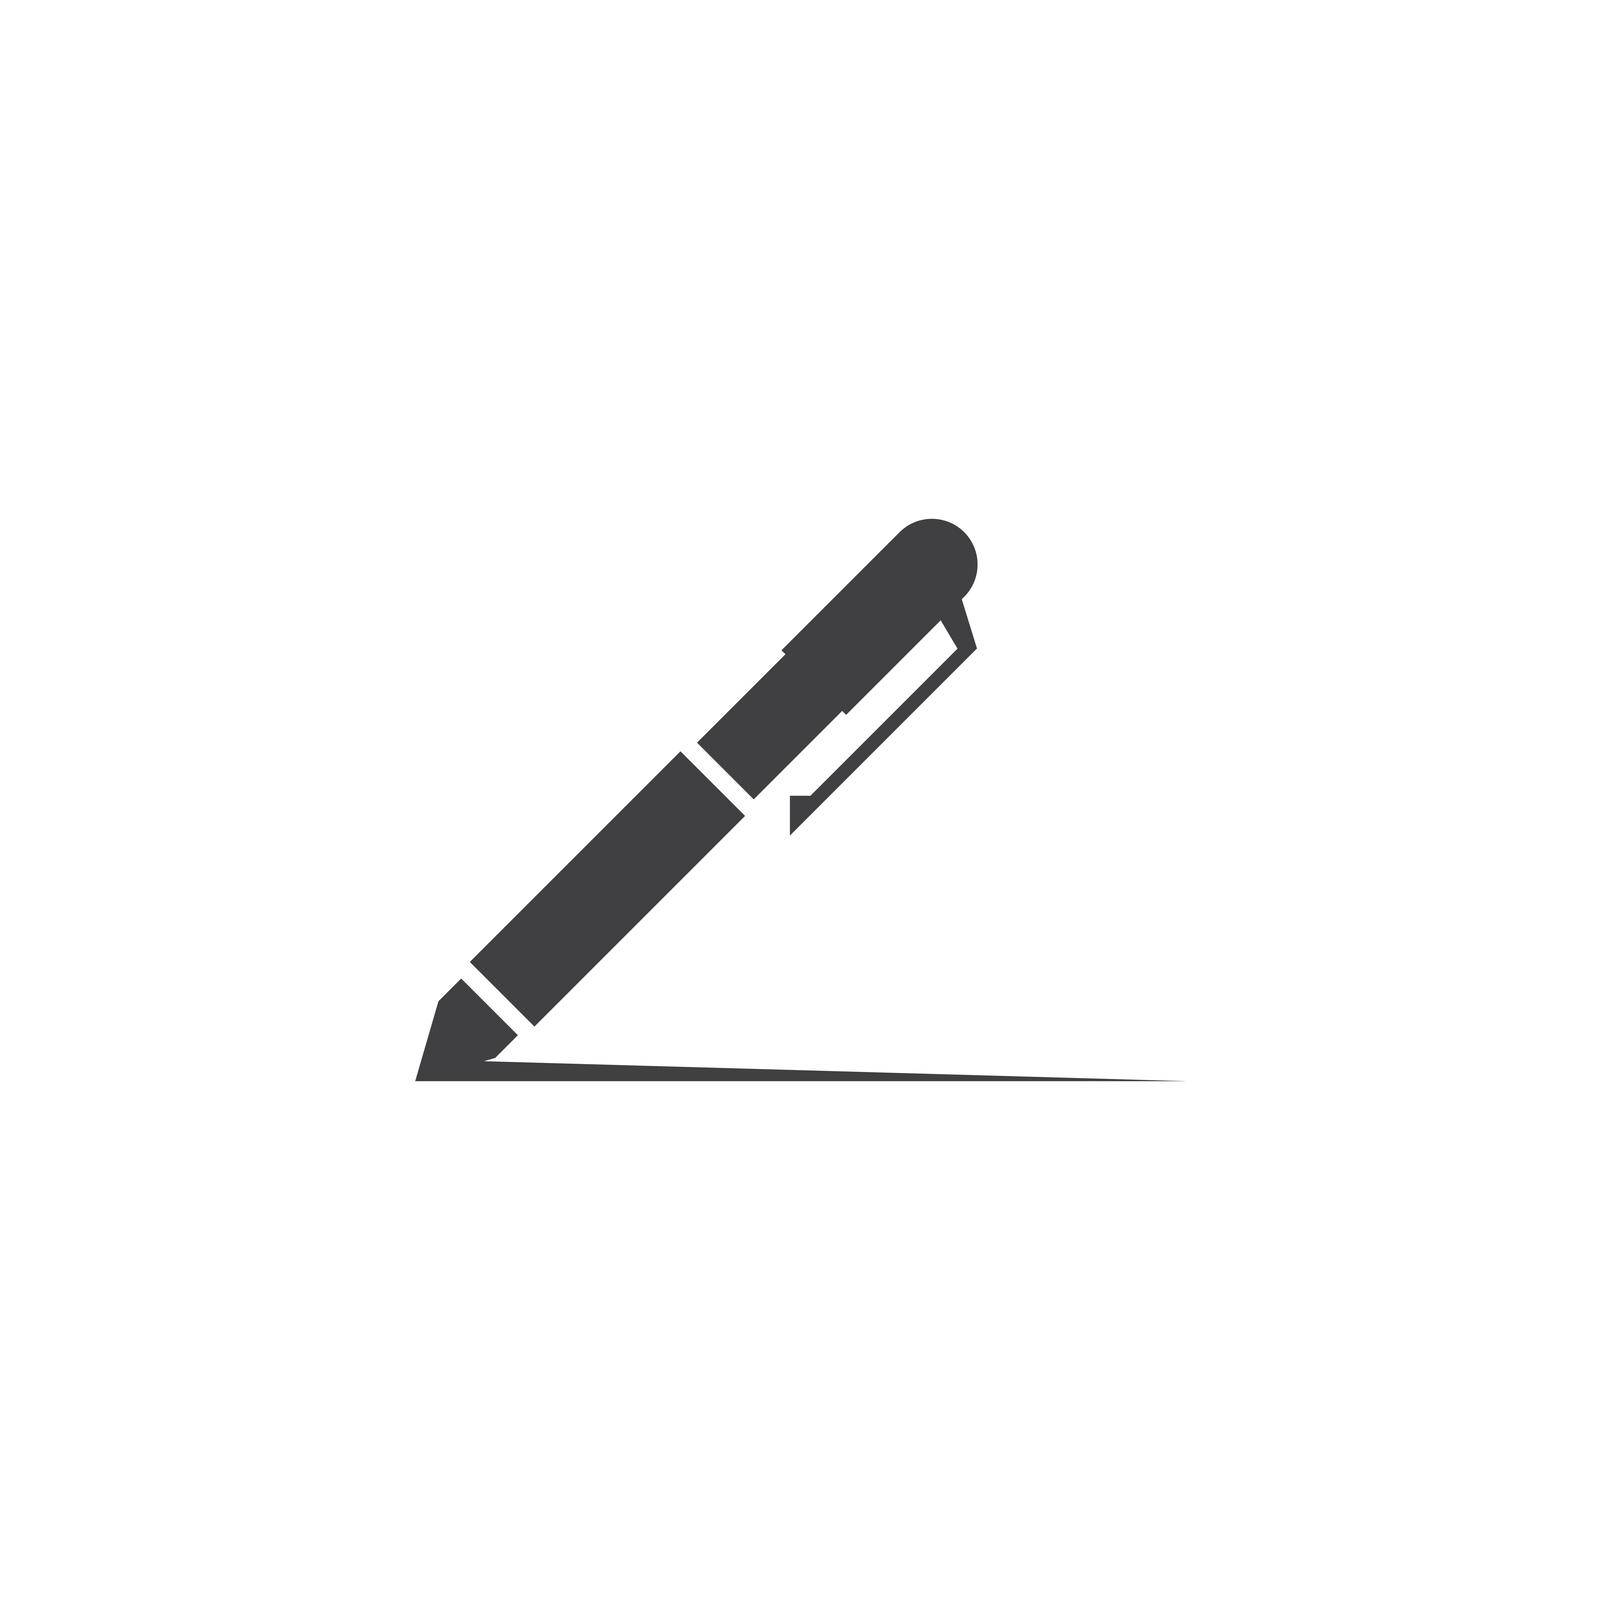 Pen icon by awk